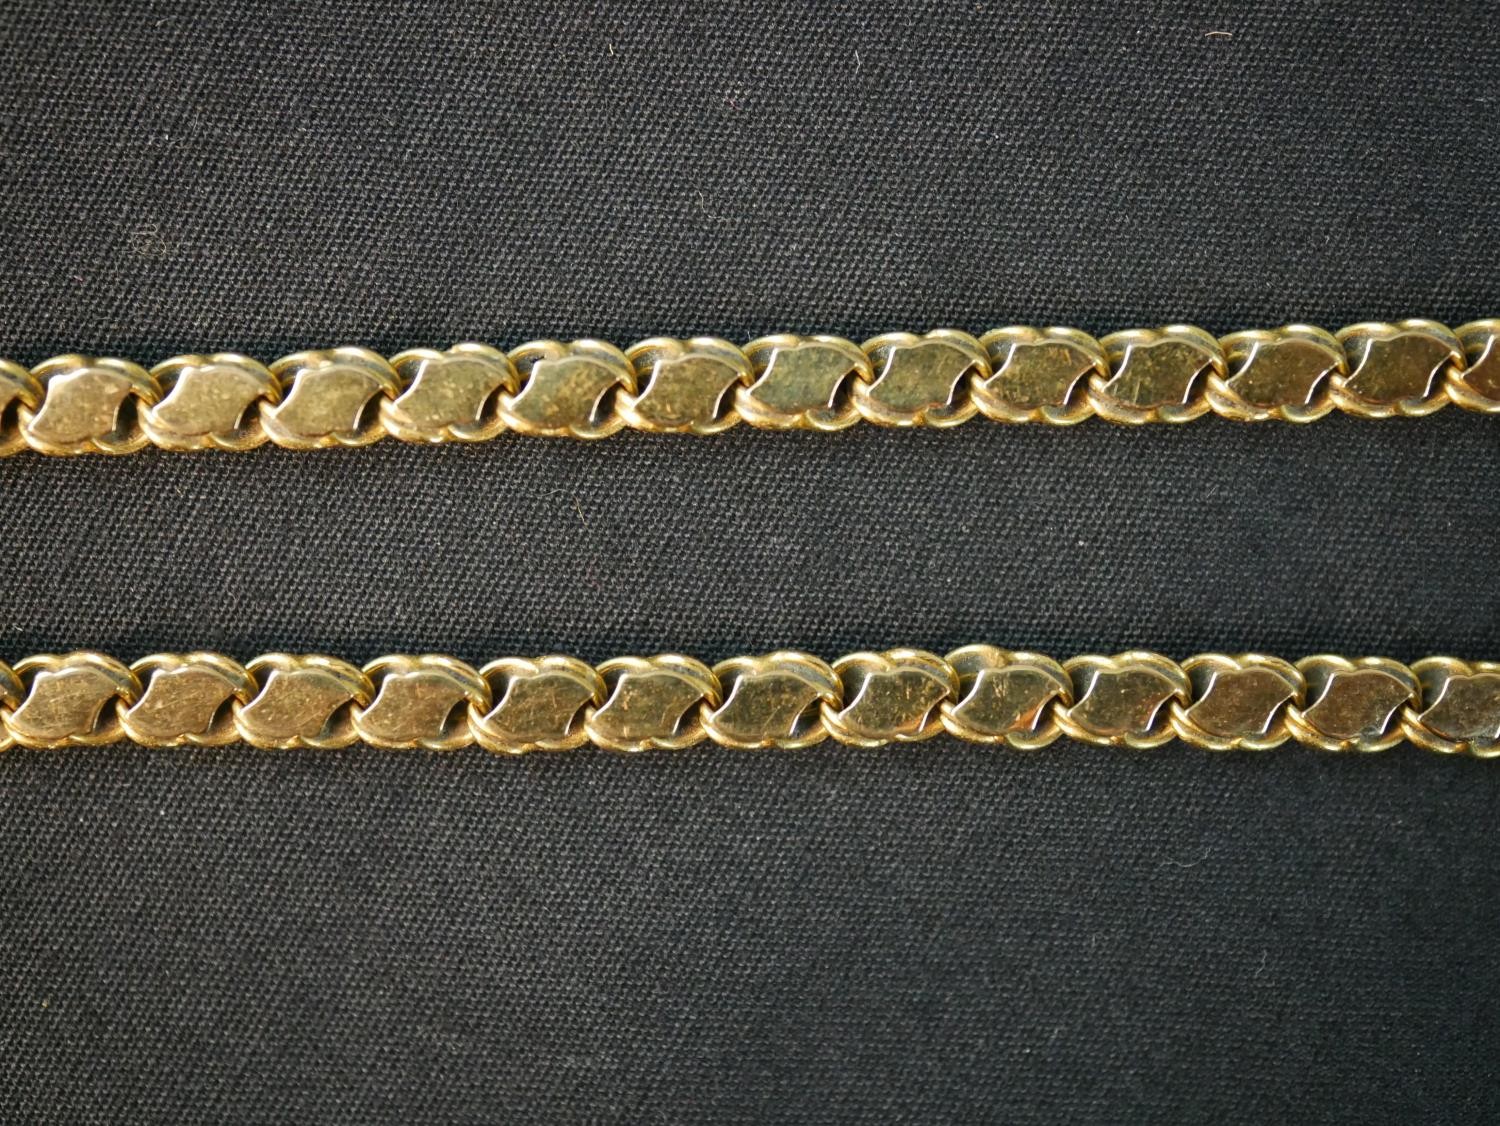 A 16 inch fancy s-link yellow metal (tests as 14ct) chain with a pair of matching earrings. The - Image 3 of 8